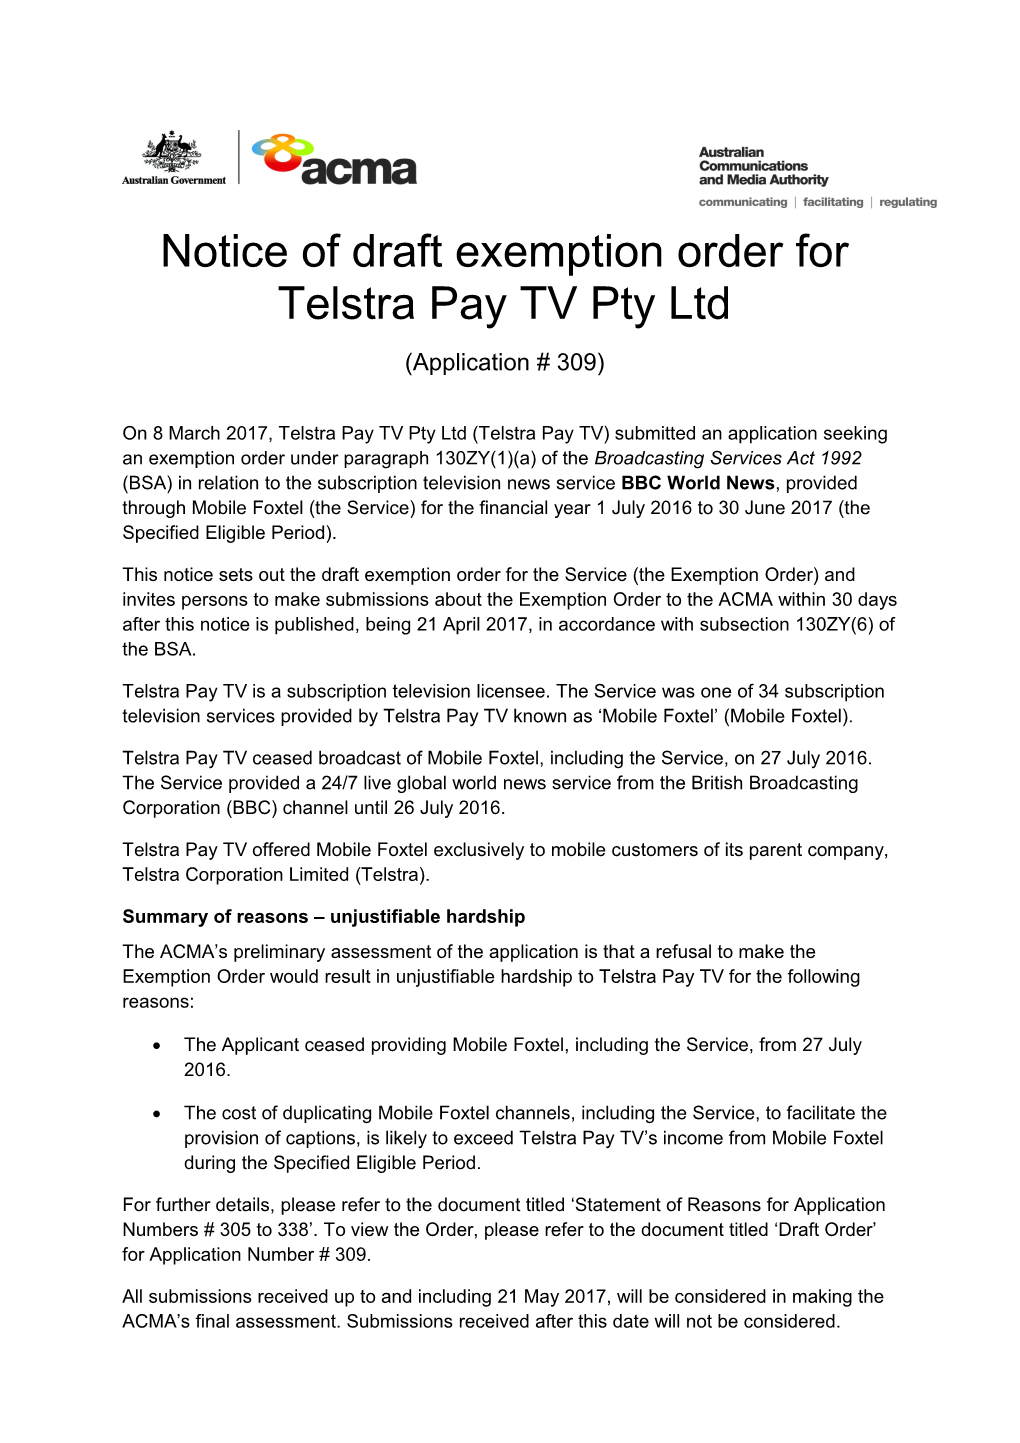 Notice of Draft Exemption Order for Telstra Pay TV Pty Ltd s1